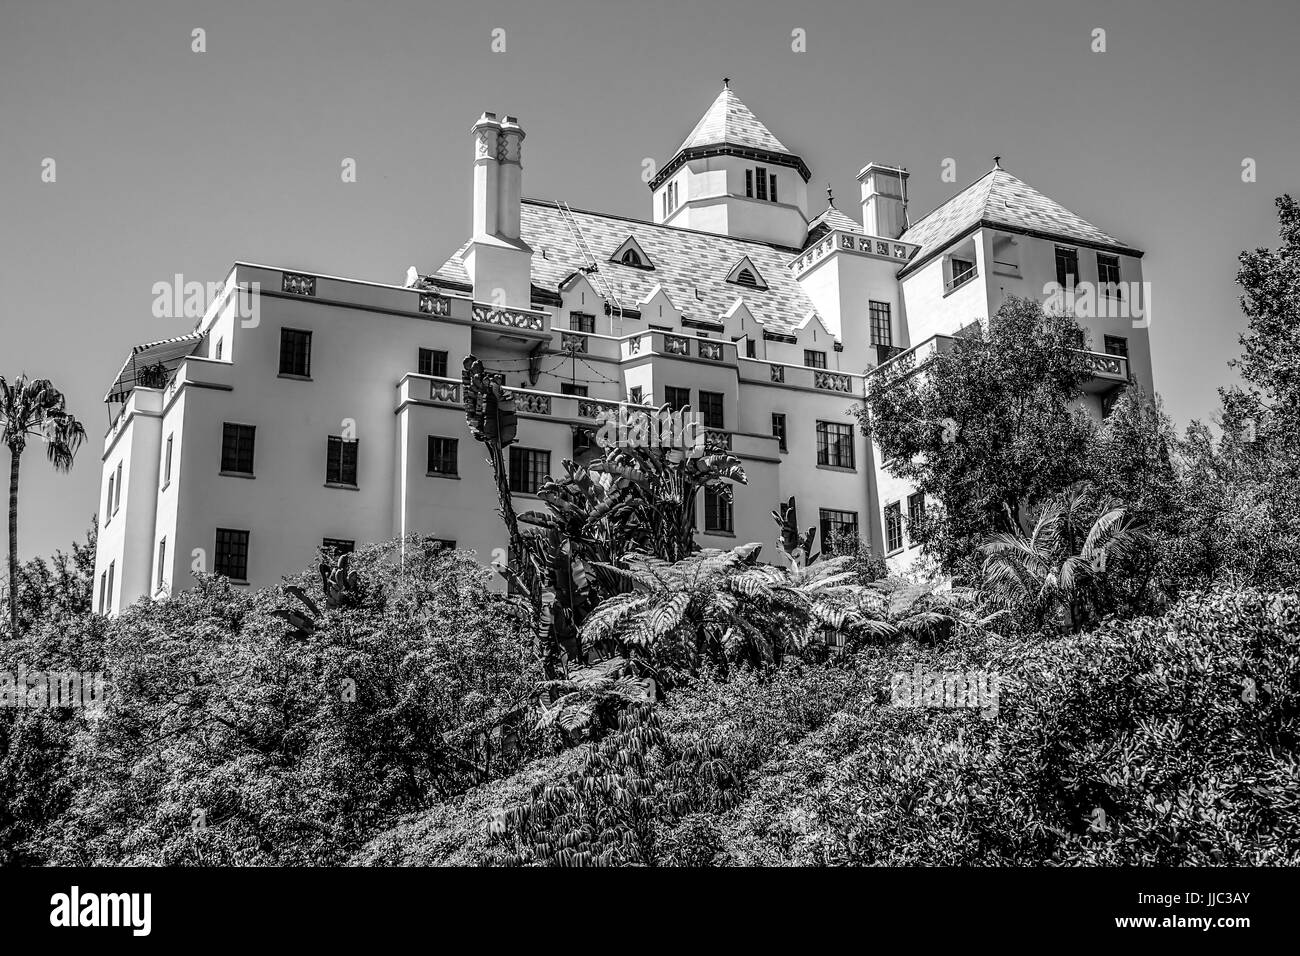 Chateau Marmont in Los Angeles - LOS ANGELES - CALIFORNIA - APRIL 20, 2017 Stock Photo